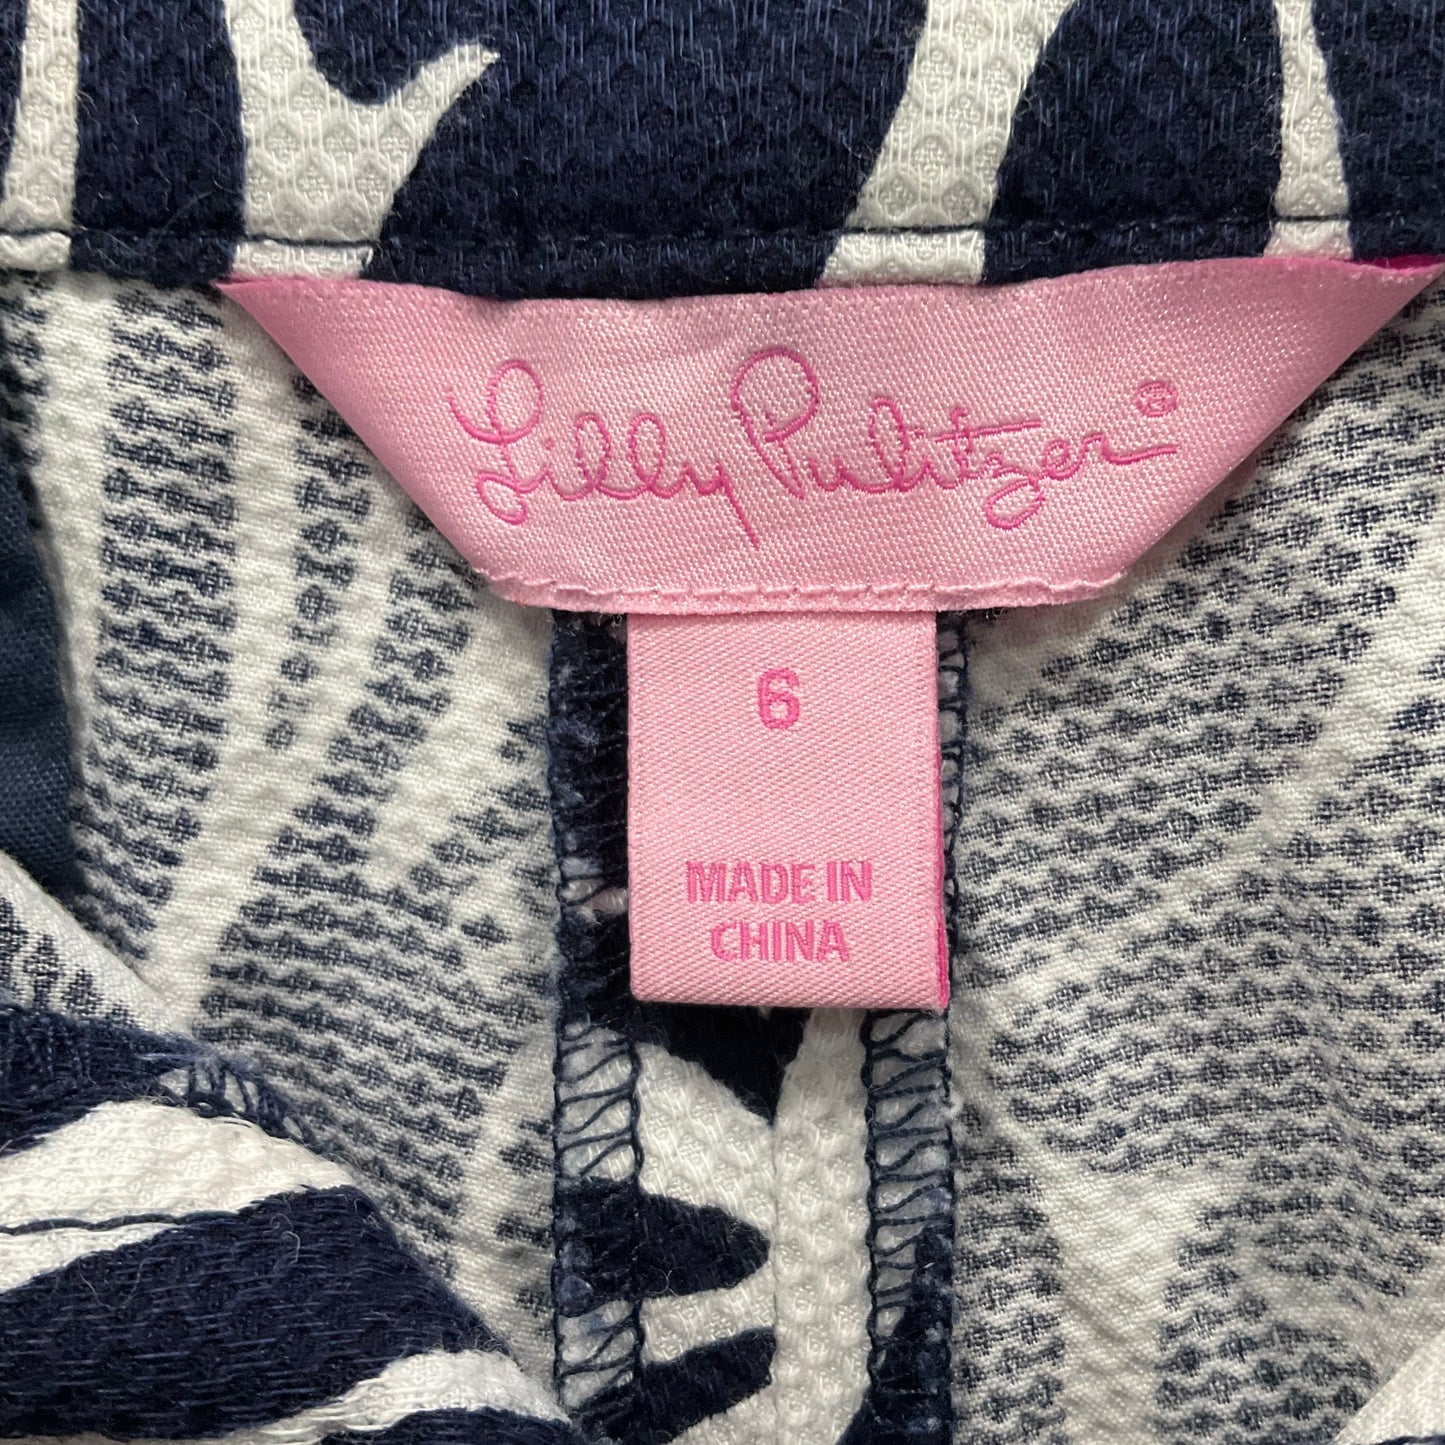 Navy Capris Lilly Pulitzer, Size 6